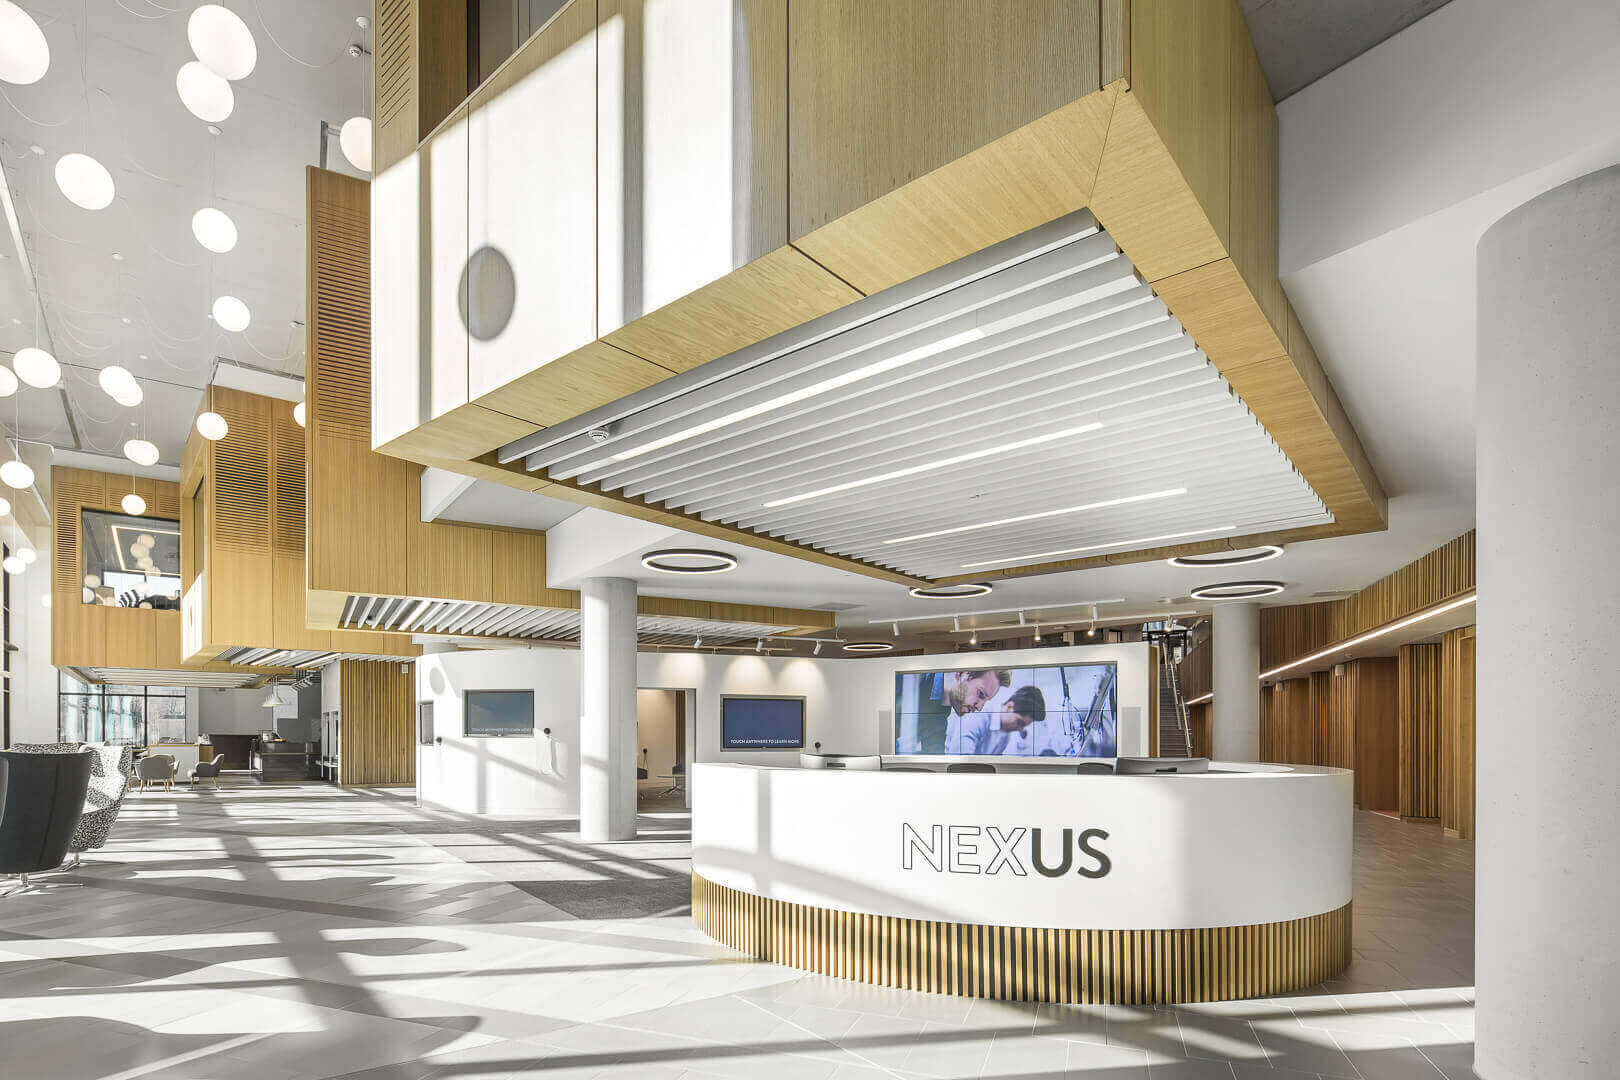 Commercial Architecture, Interiors & Aerial Photography - Construction and refurbishment at Nexus, University of Leeds